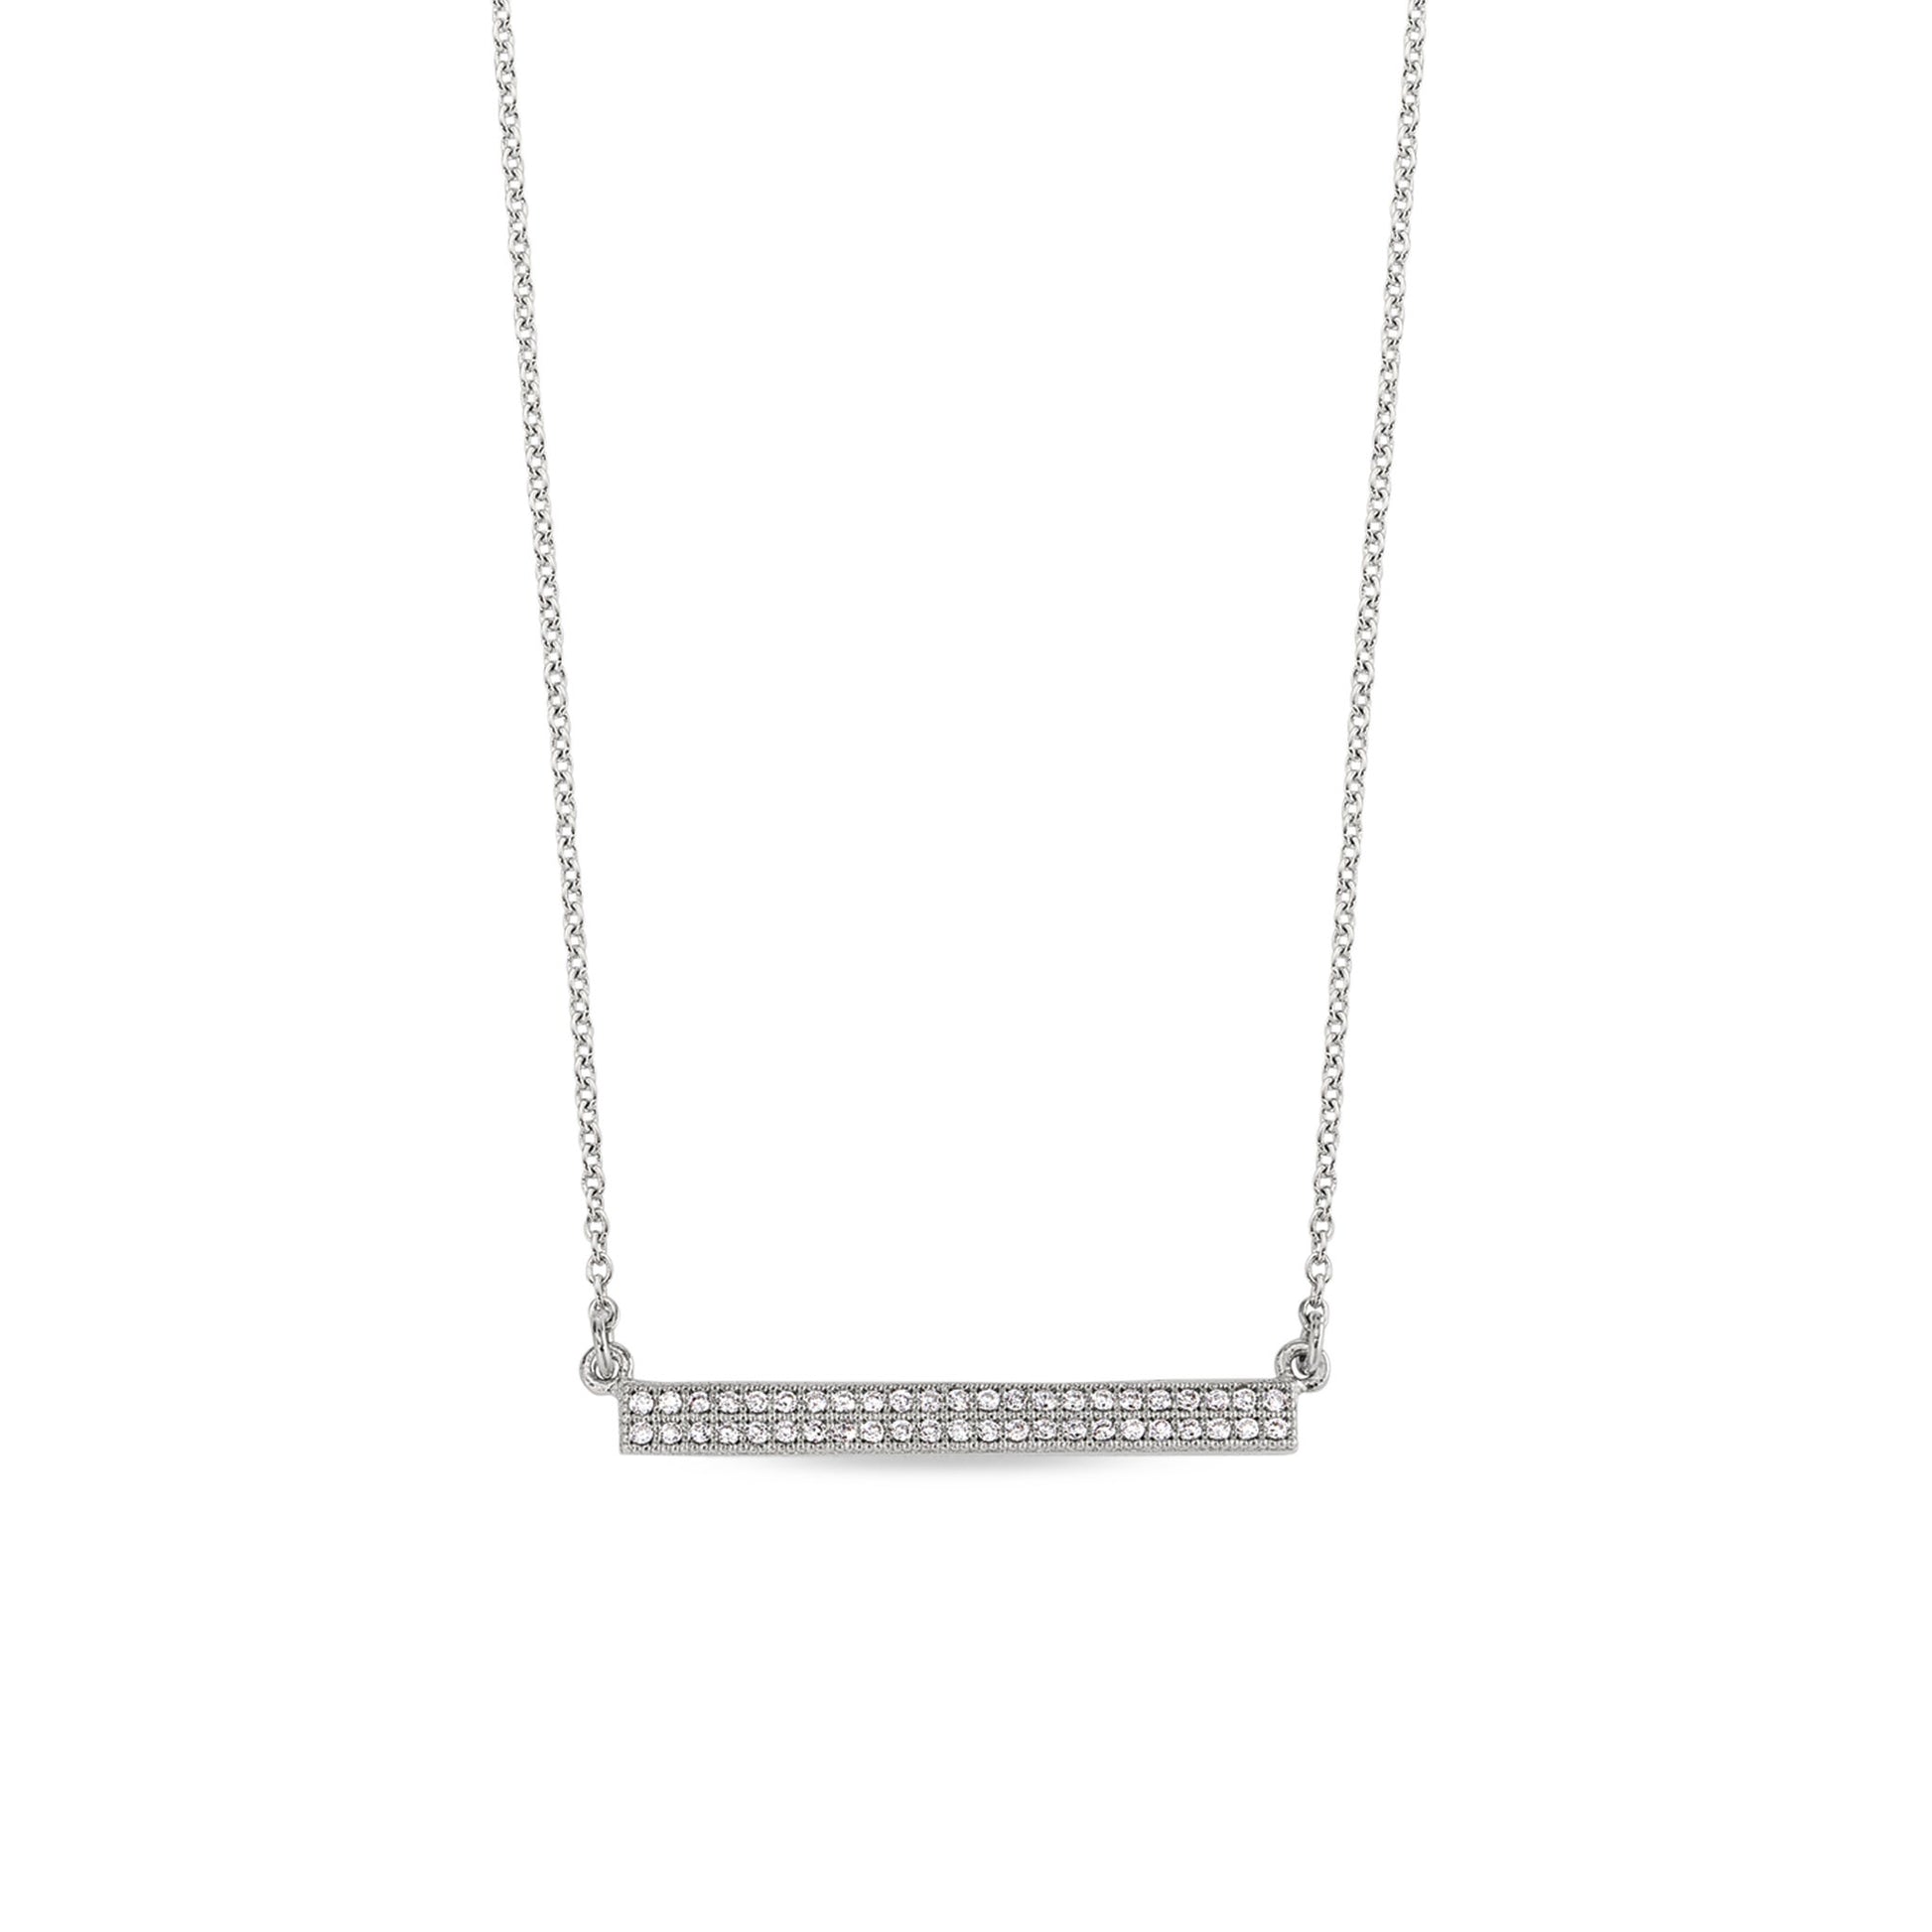 A two row bar necklace with 46 simulated diamonds displayed on a neutral white background.